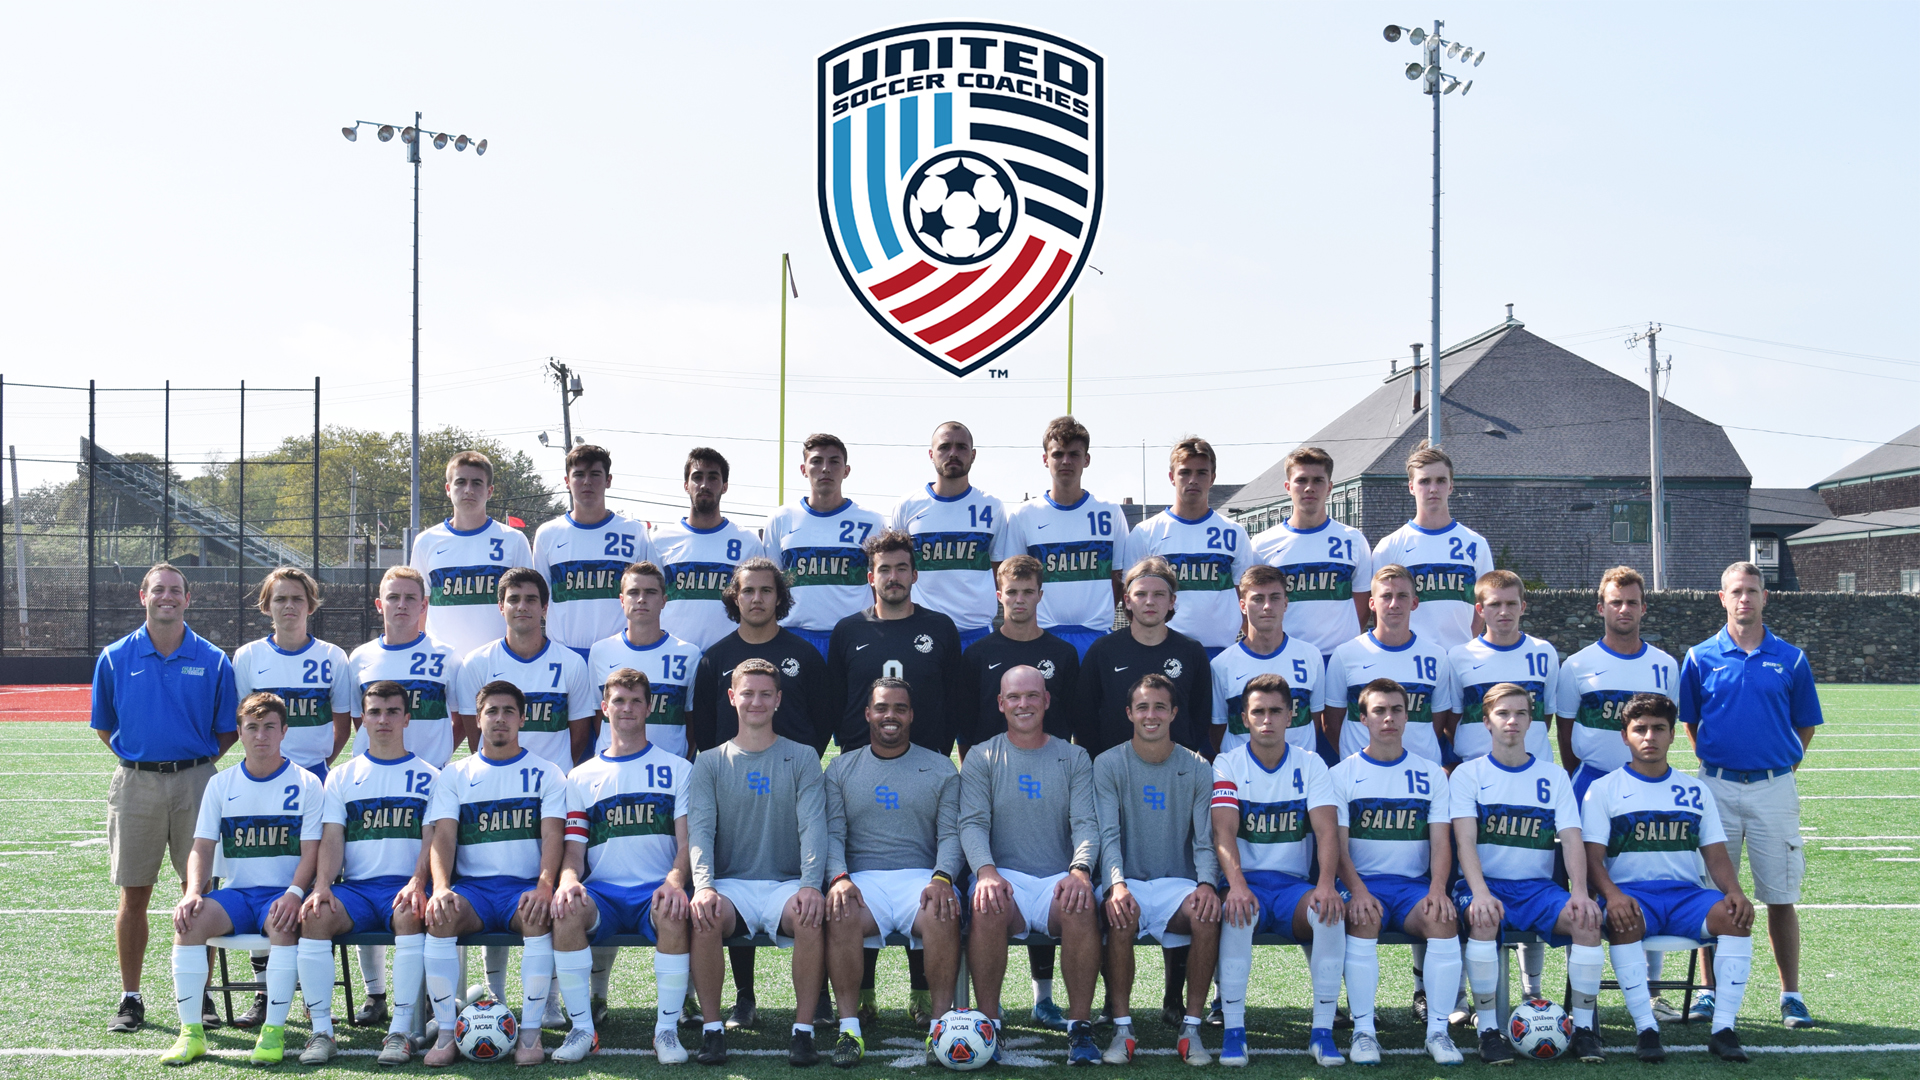 For the ninth time in 11 seasons the Salve Regina University men's soccer team has been announced as recipient of the United Soccer Coaches Team Academic Award for the previous (2019-20) academic year.